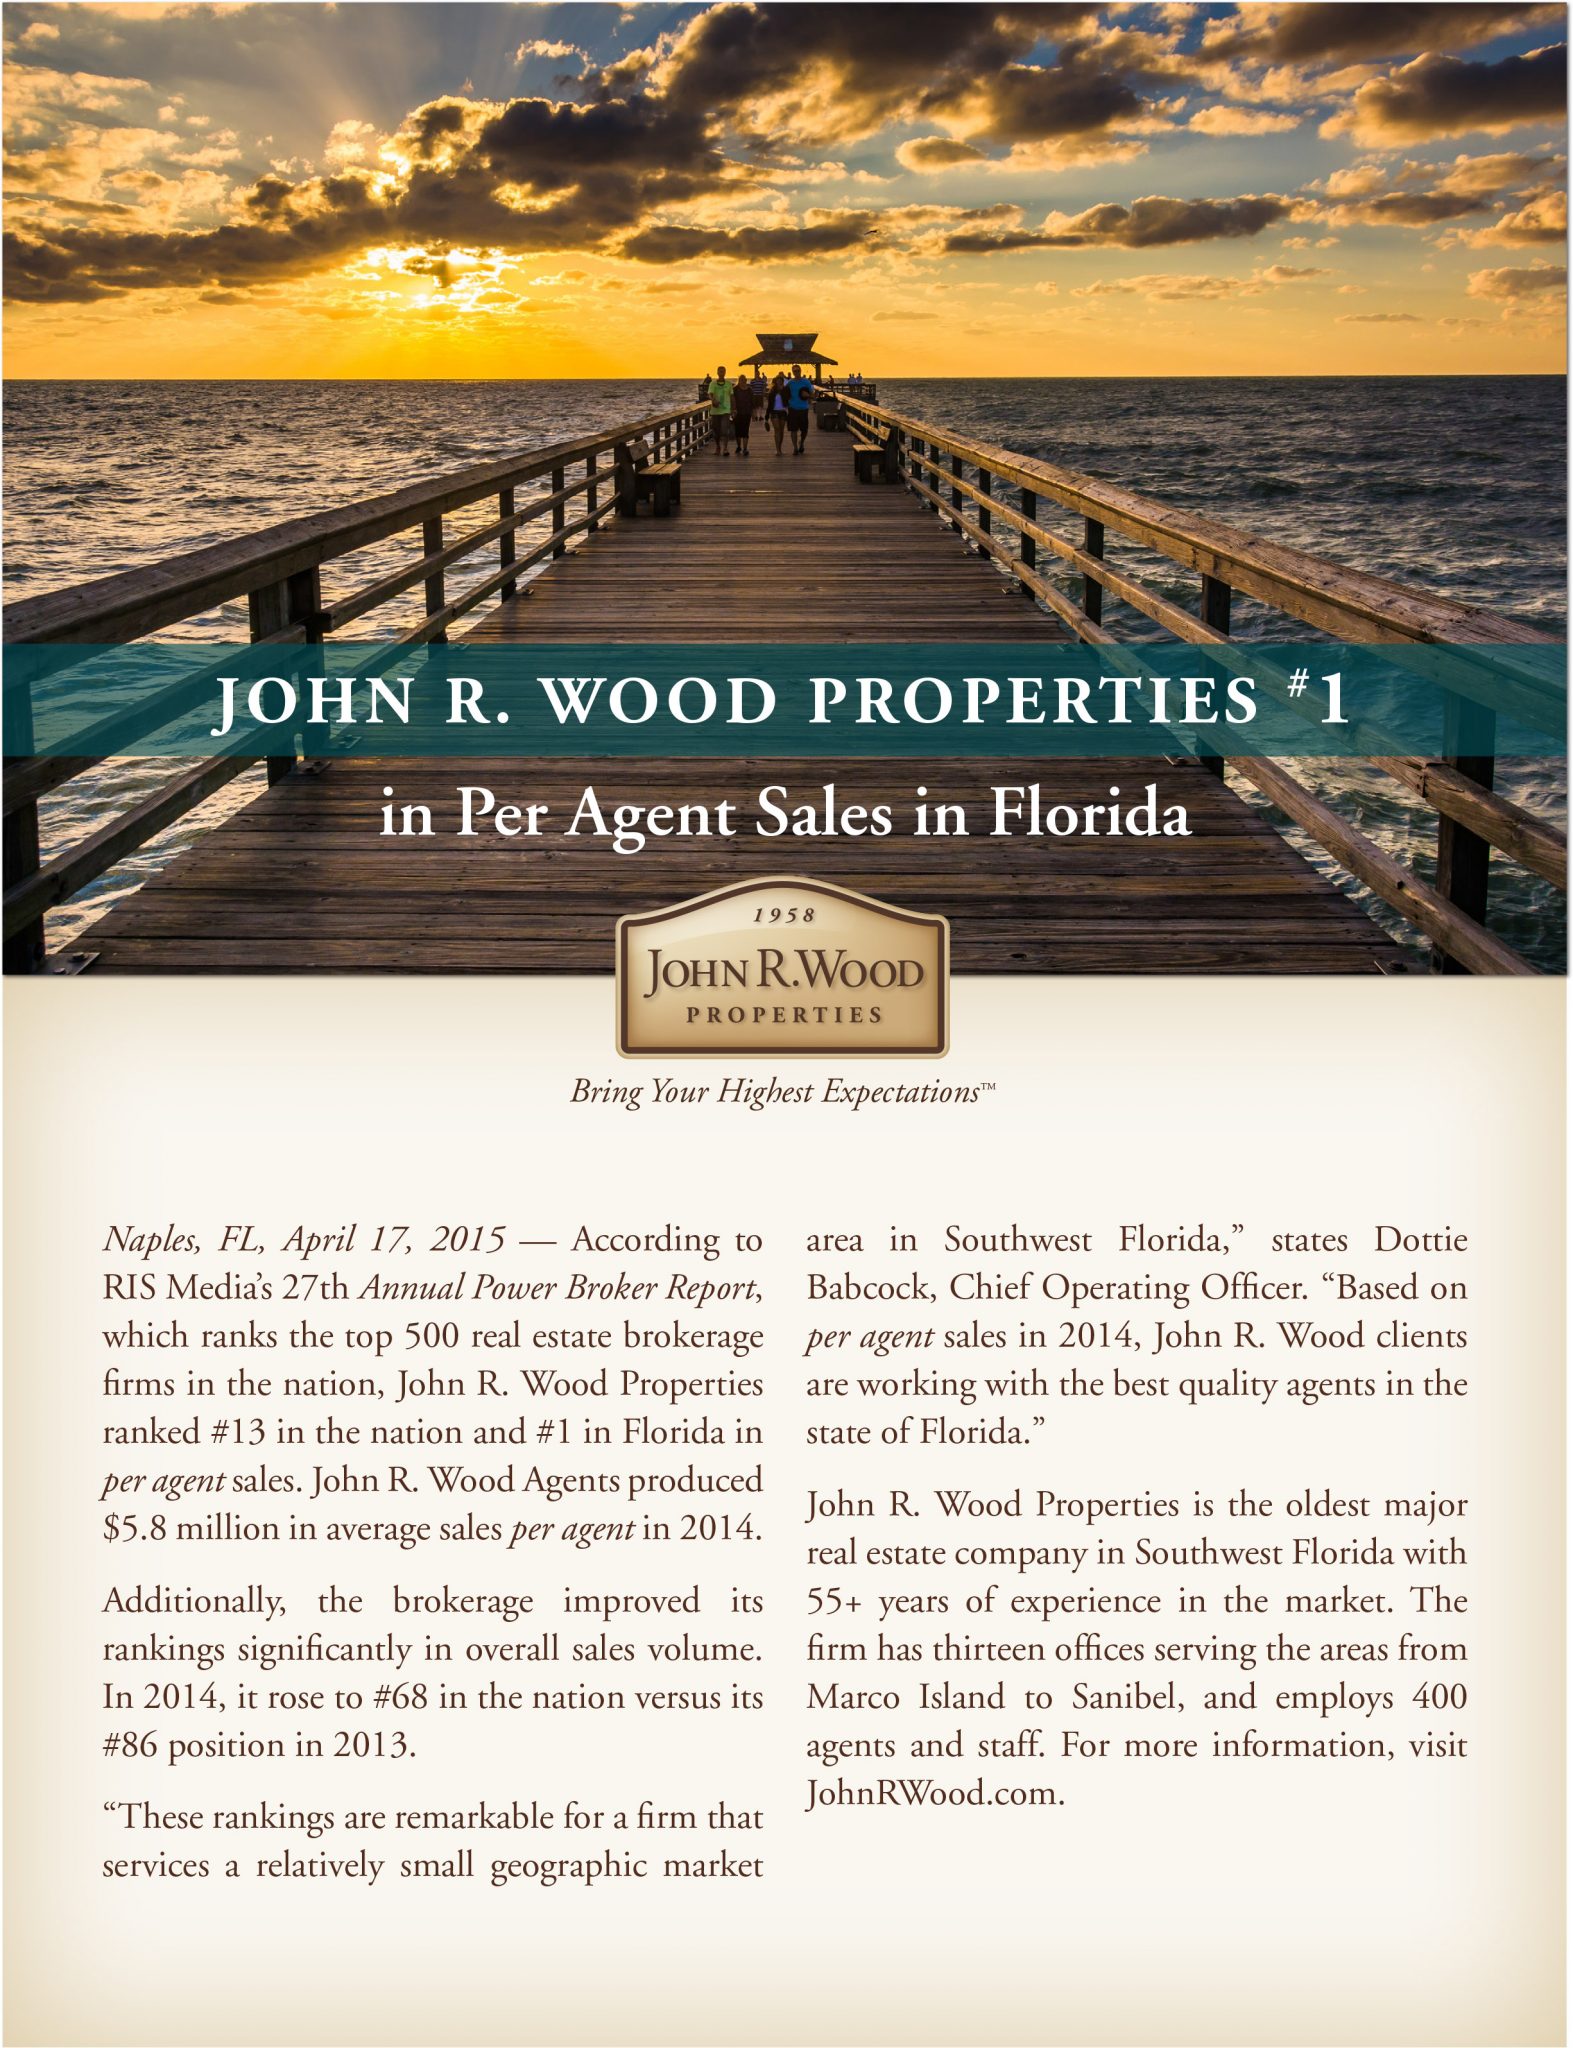 JohnRWood Properties #1 in per agent sales in Florida.indd